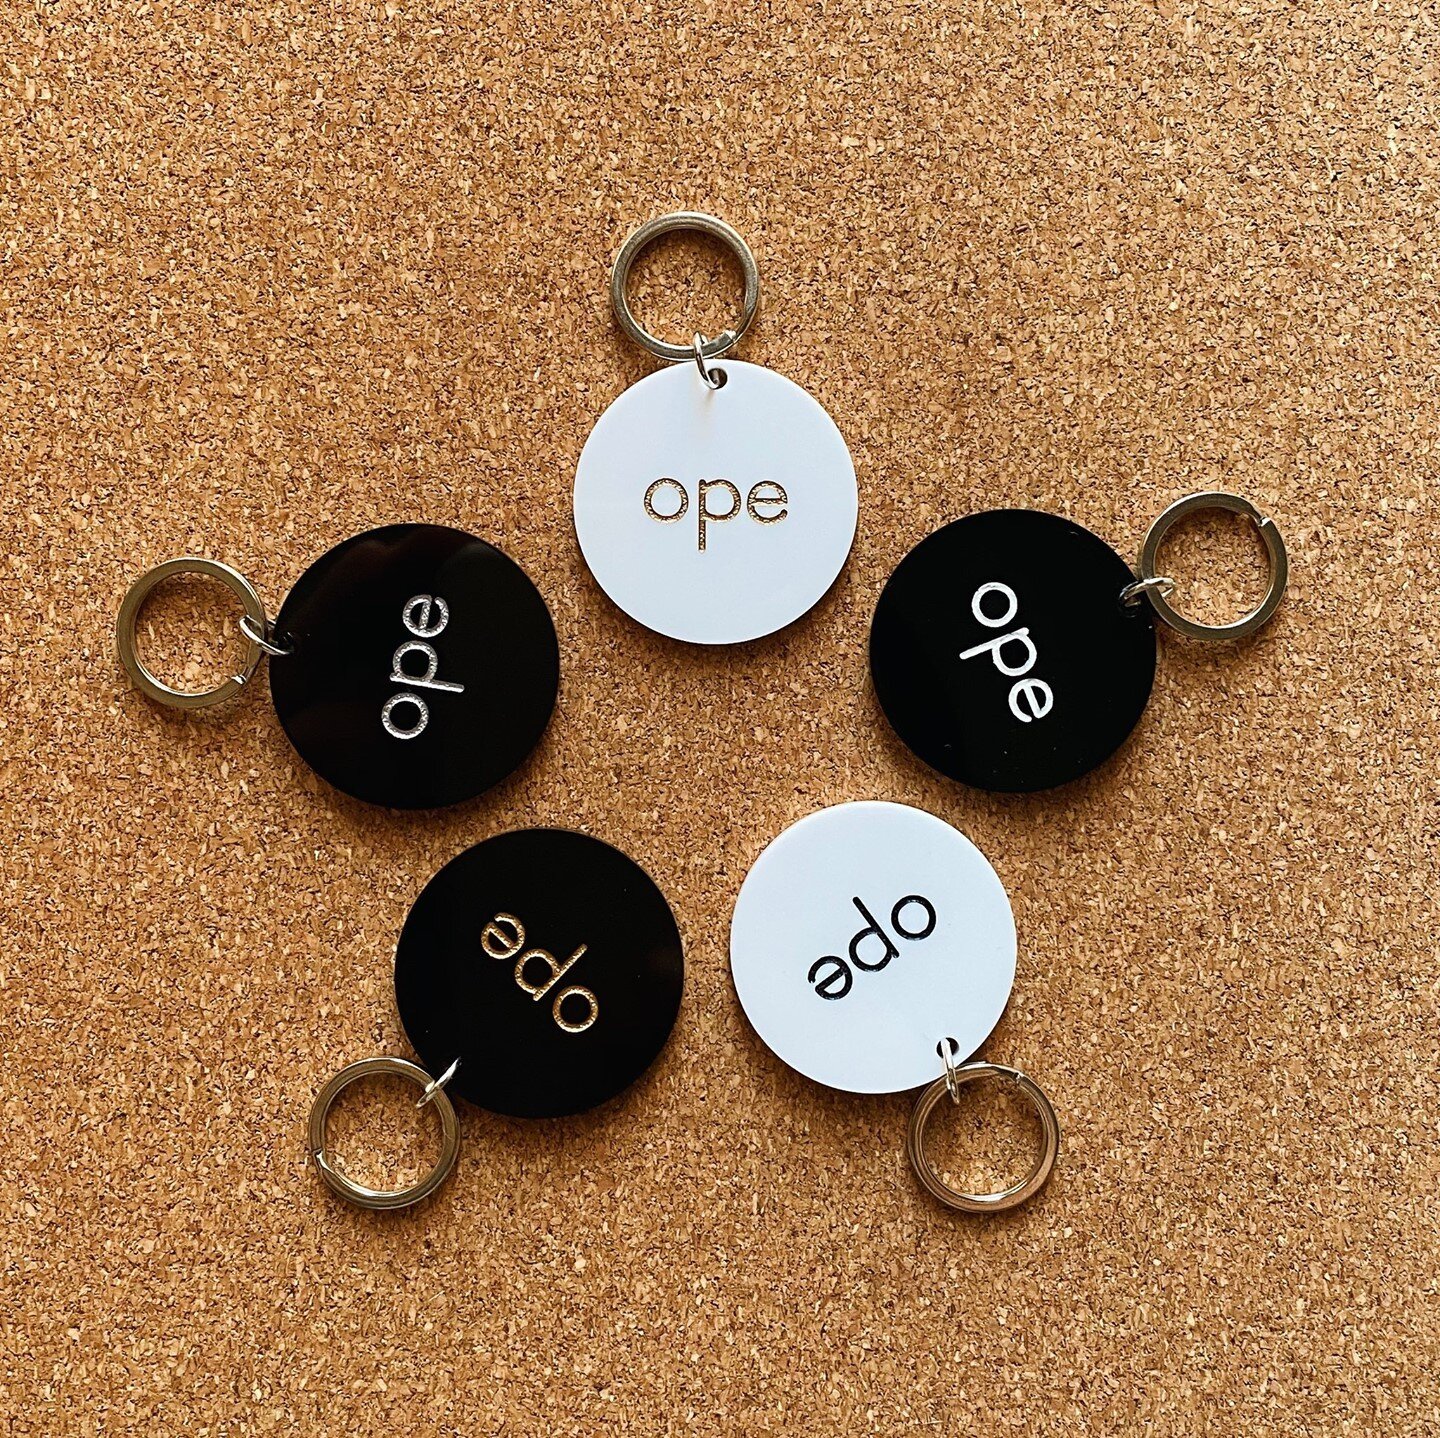 Nothing says midwest like &quot;ope&quot;, just gonna sneak these laser cut hand painted keychains, made in mke, right past ya. Such a perfect lil gift from @dustypetes for all your midwest pals.